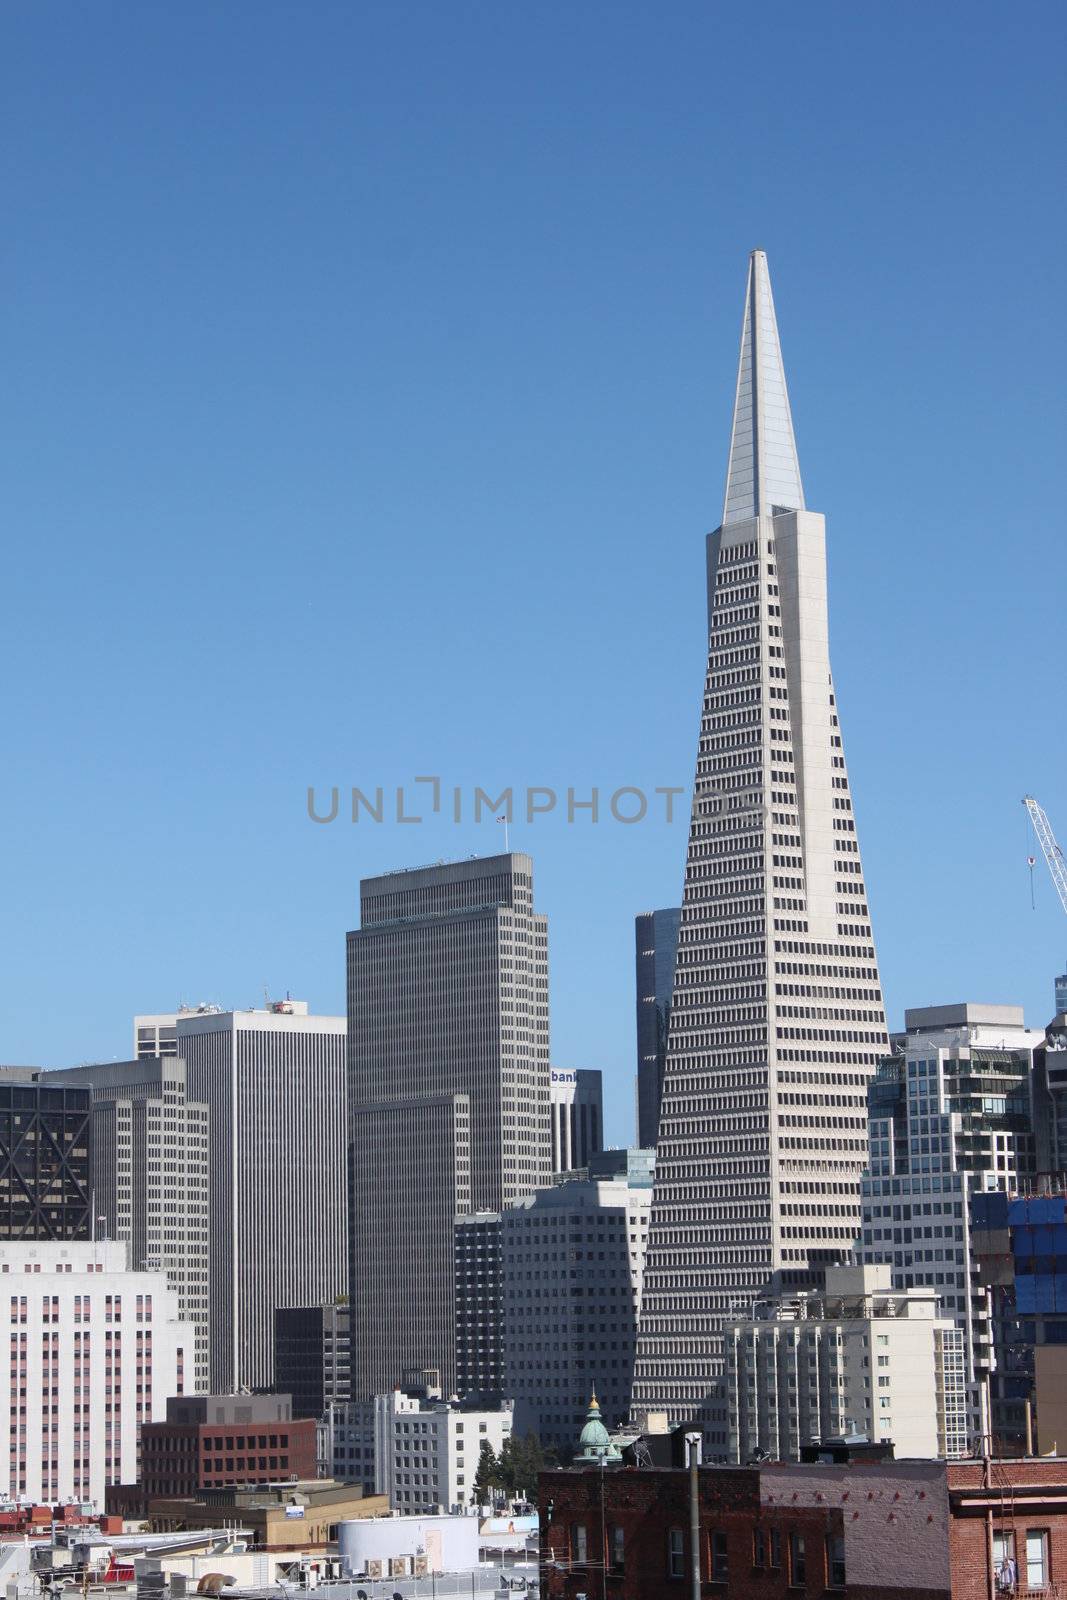 View of the Transamerica Pyramid Building in San Francisco